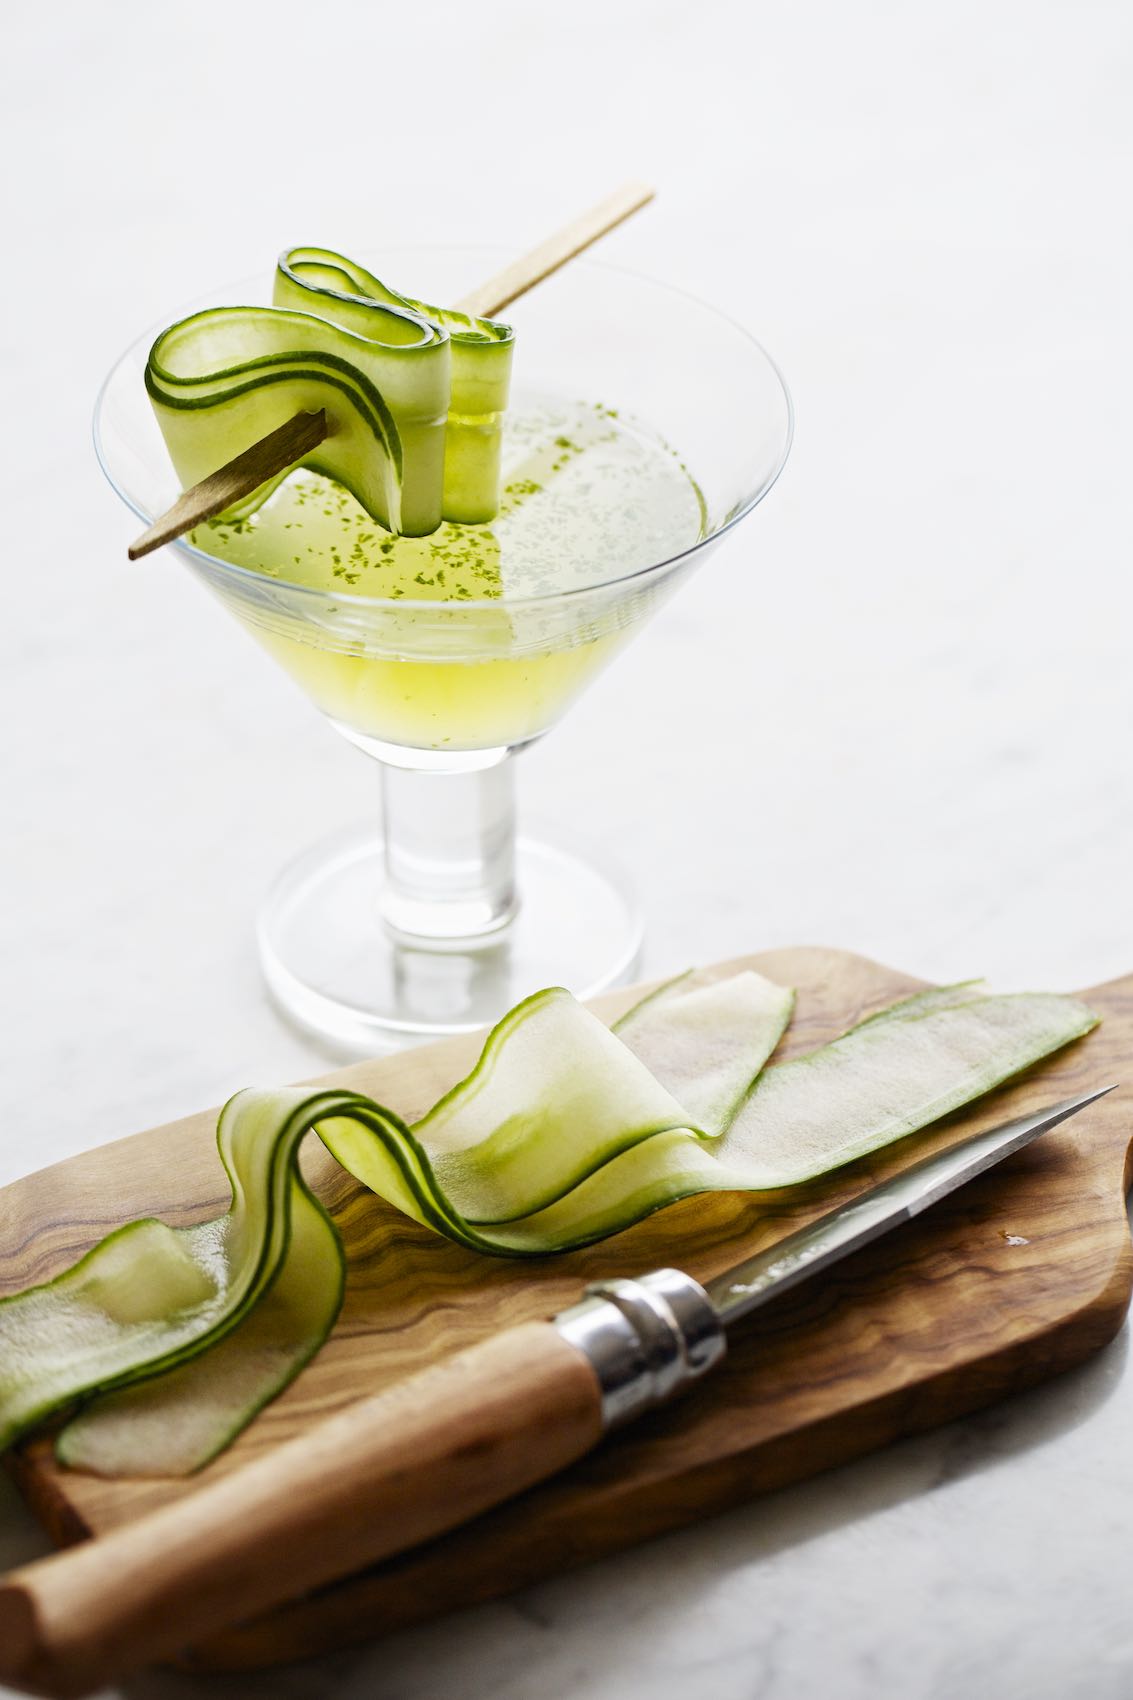 Jody Horton Photography - Neiman Marcus cucumber cocktail with Opinel knife.